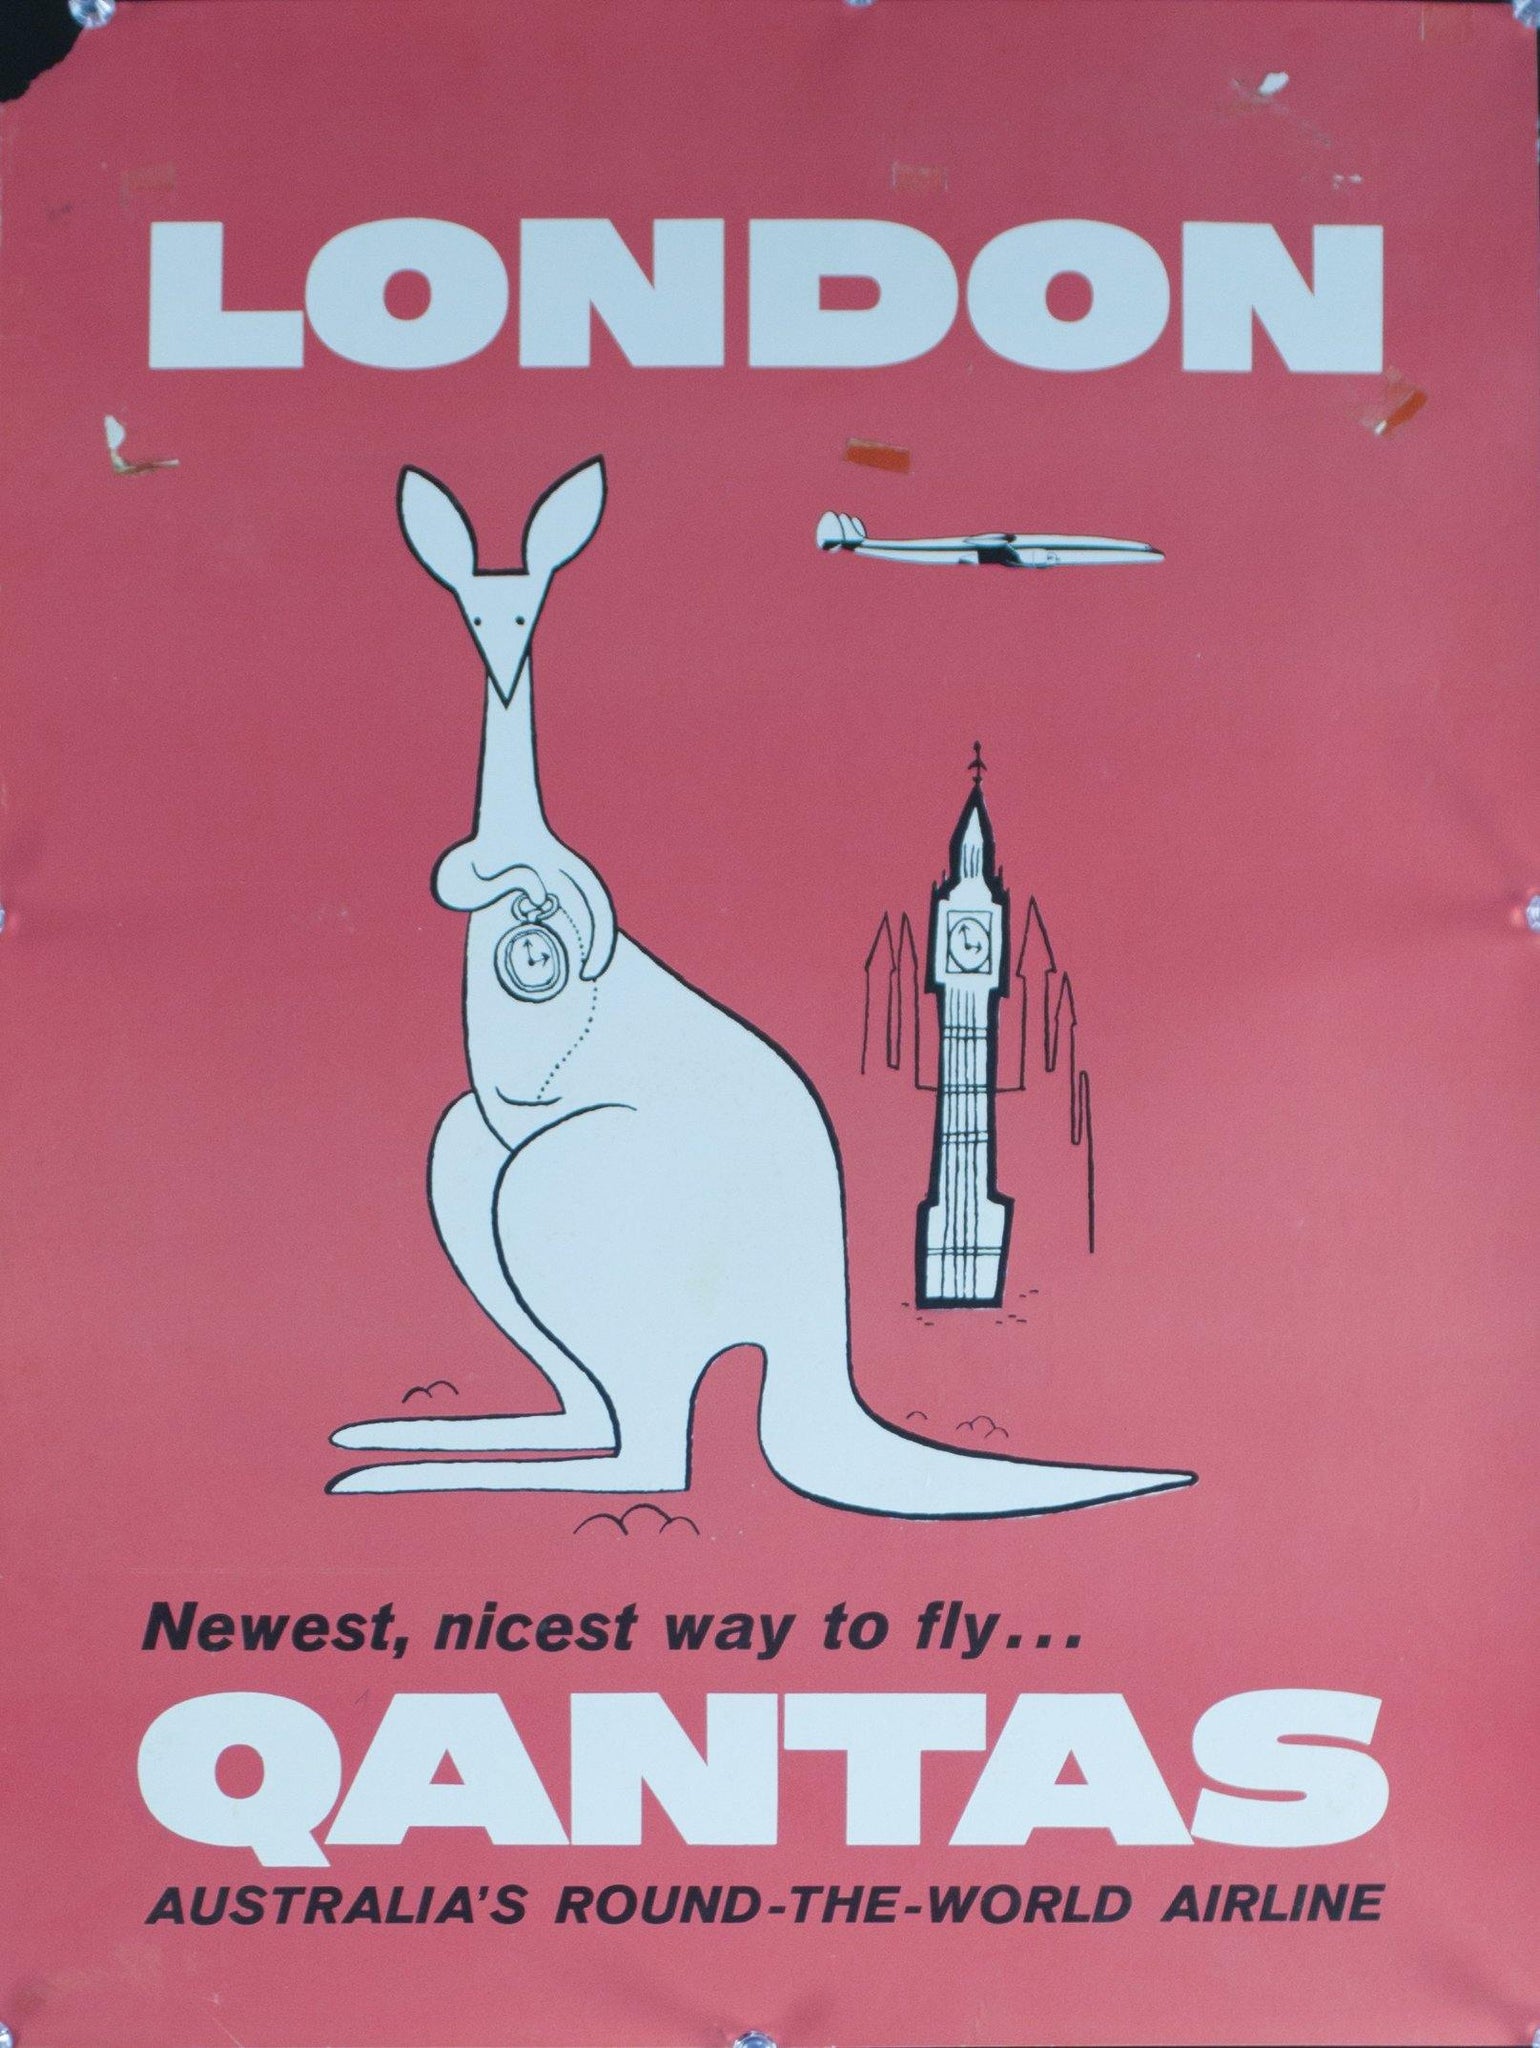 London | Newest, nicest way to fly | Qantas| Australia's Round-the-World Airline - Golden Age Posters